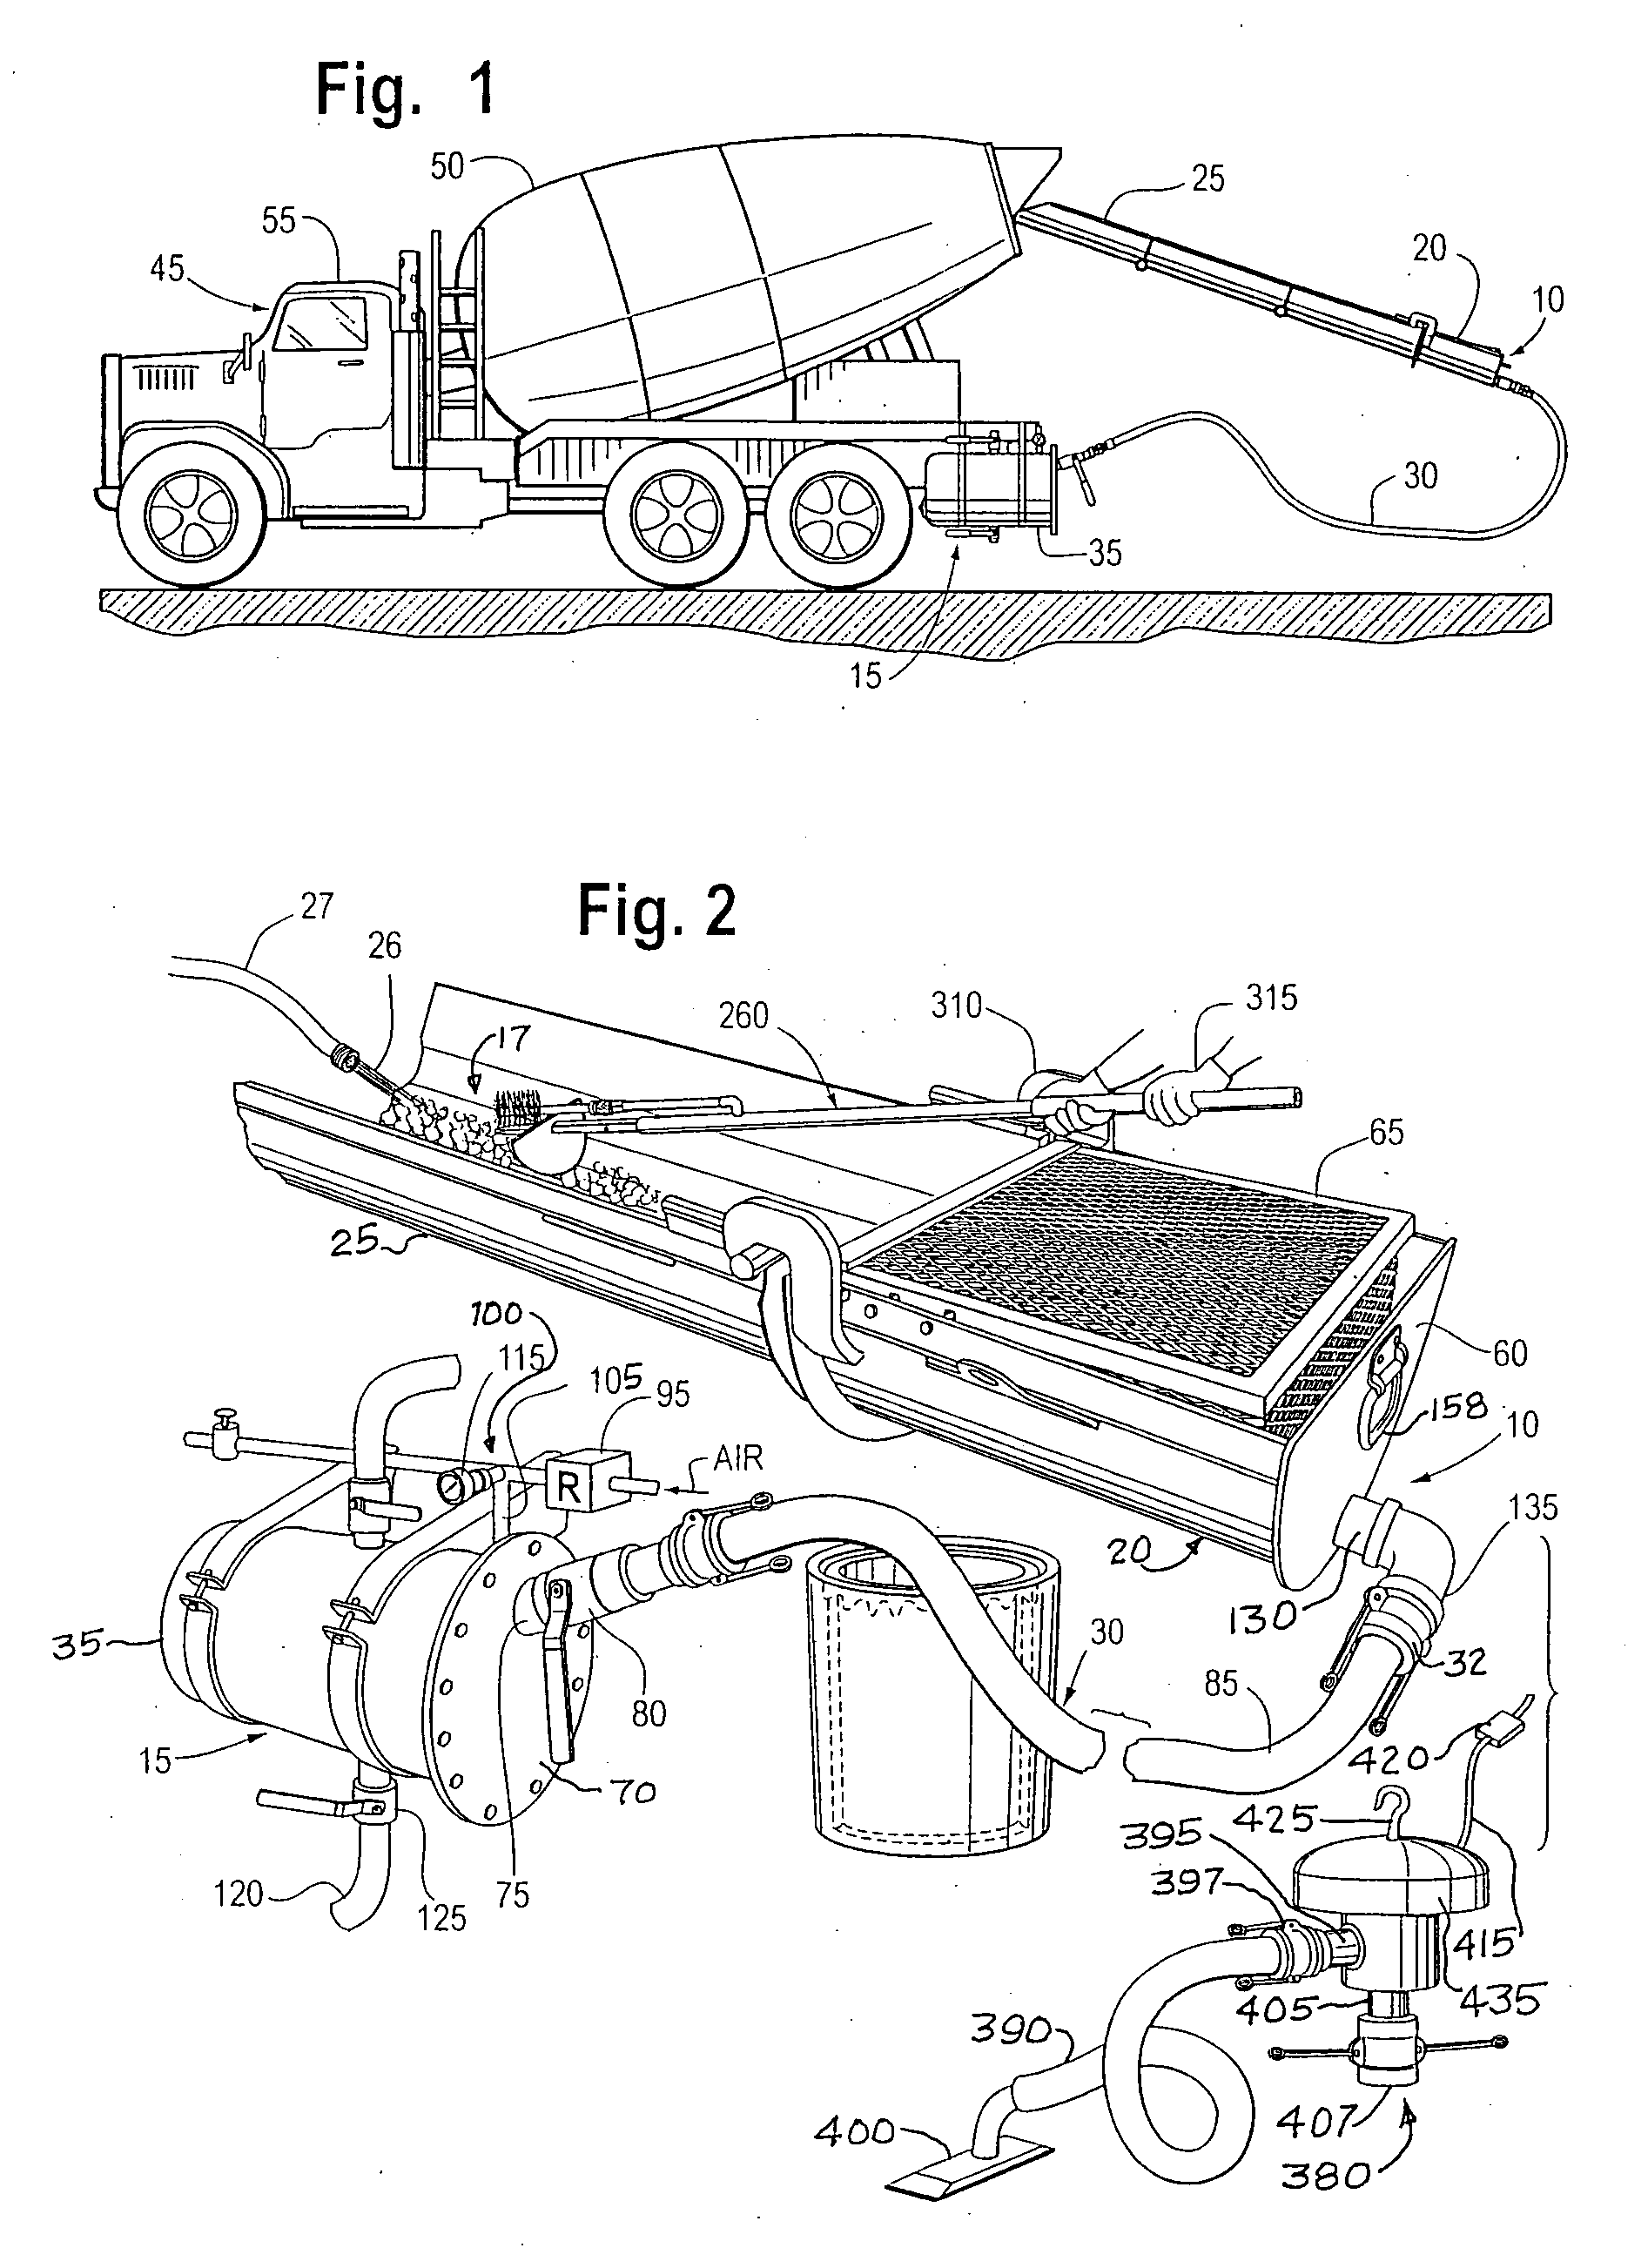 Concrete wash out and slurry capture method and system